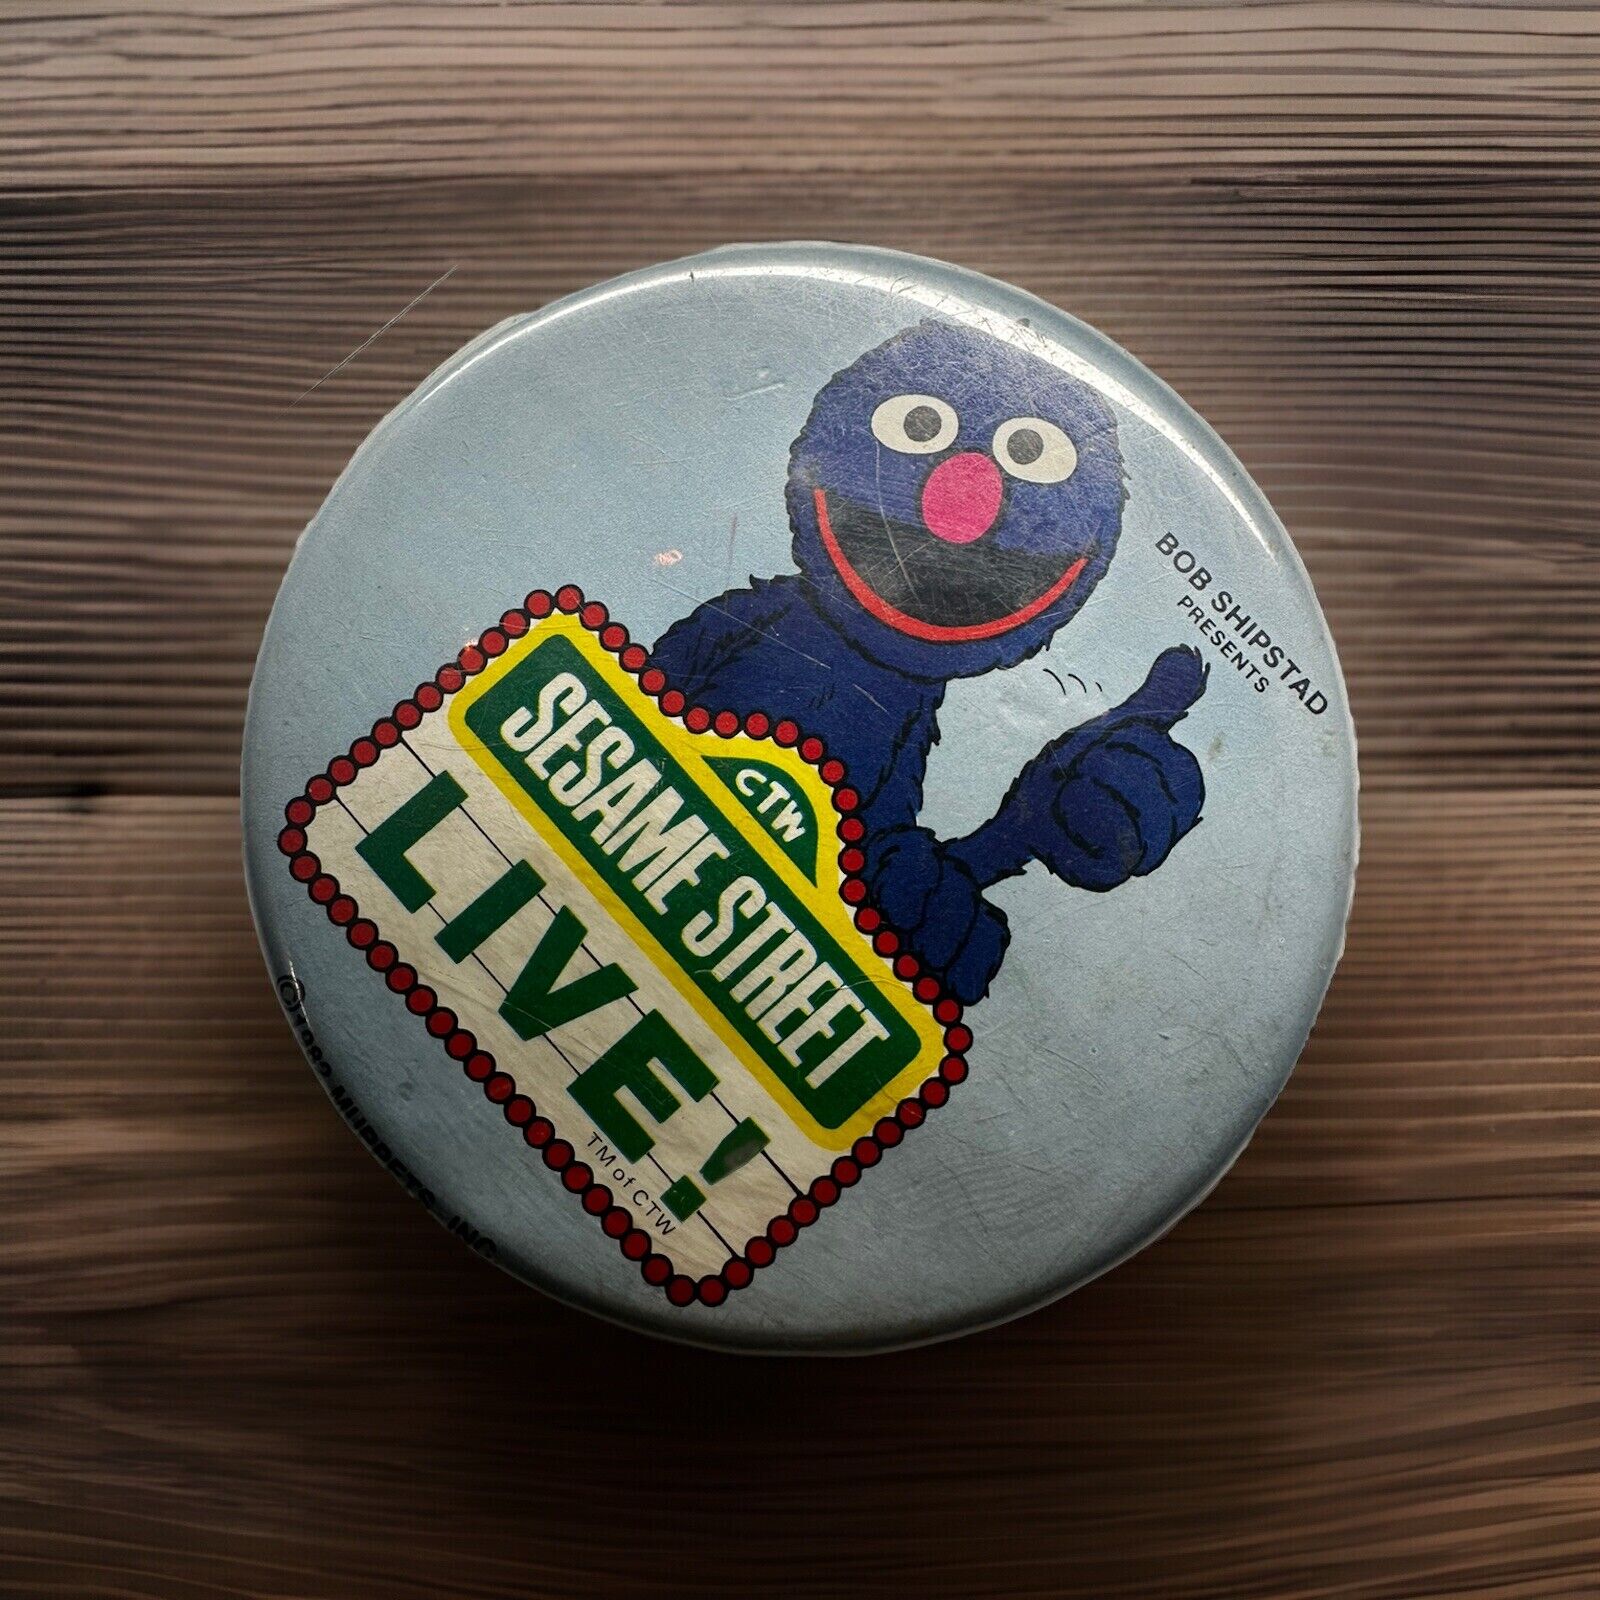 Vintage 1982 SESAME STREET LIVE Metal Button Pin Muppets Grover Pinback 3.5 Inch